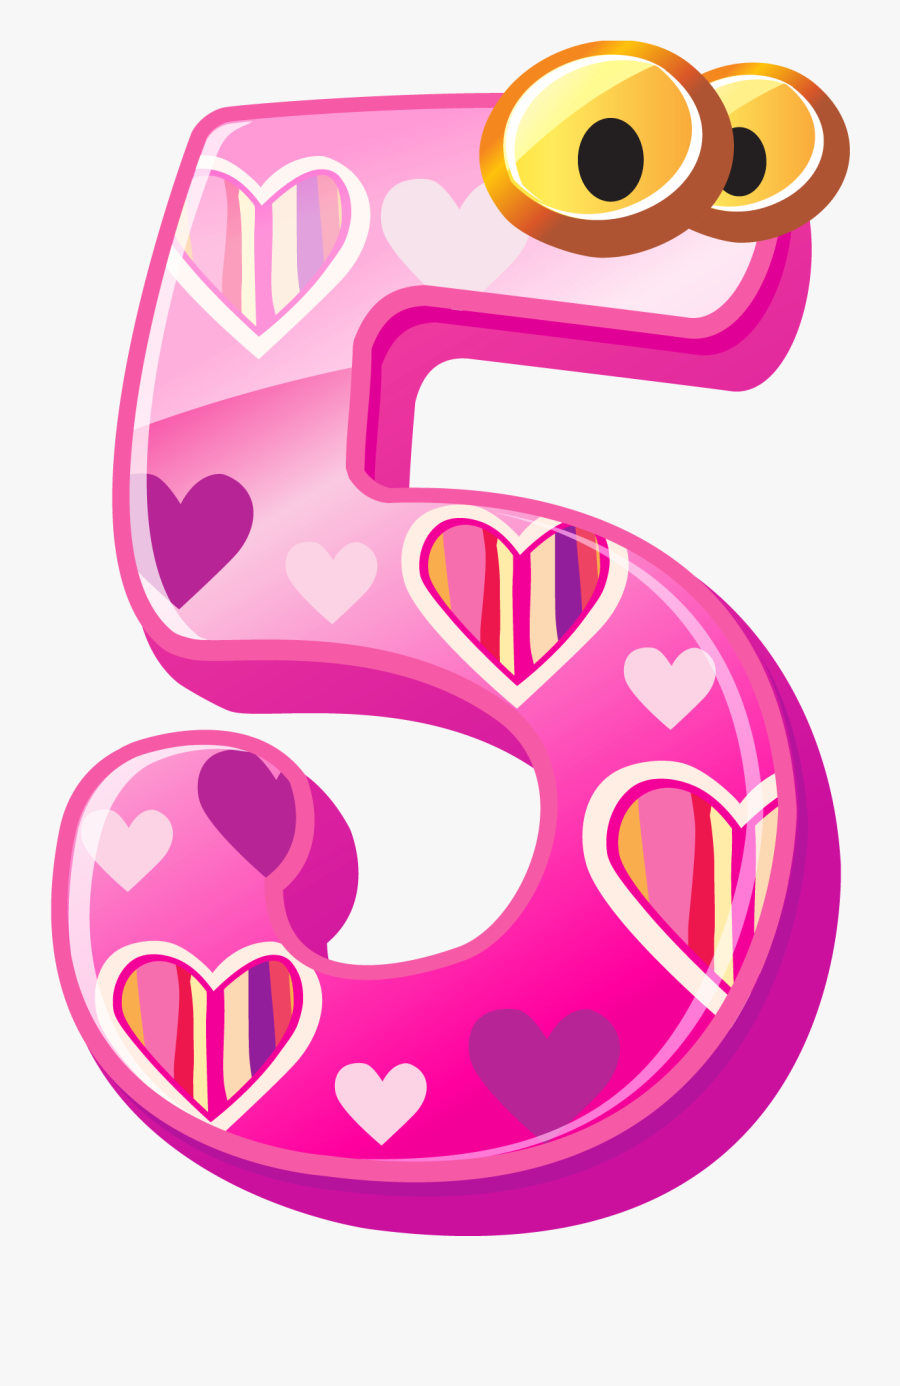 Cute Number Five Png Clipart Image - Cute Numbers Clipart 1 10, Transparent Clipart